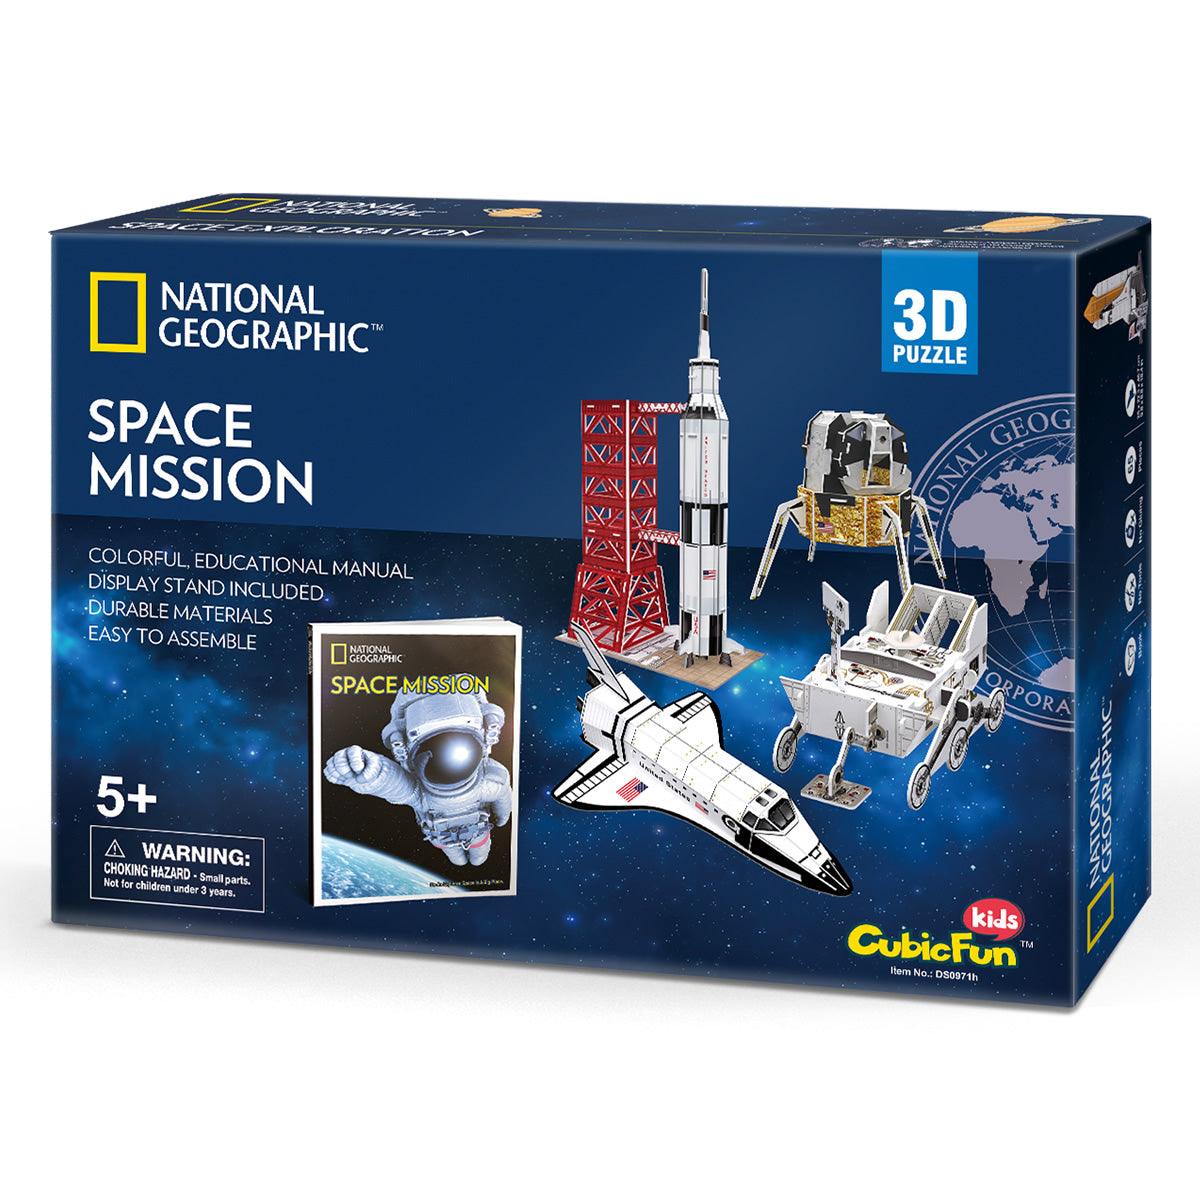 Frank Cubic Fun National Geographic - Space Mission 3D puzzle